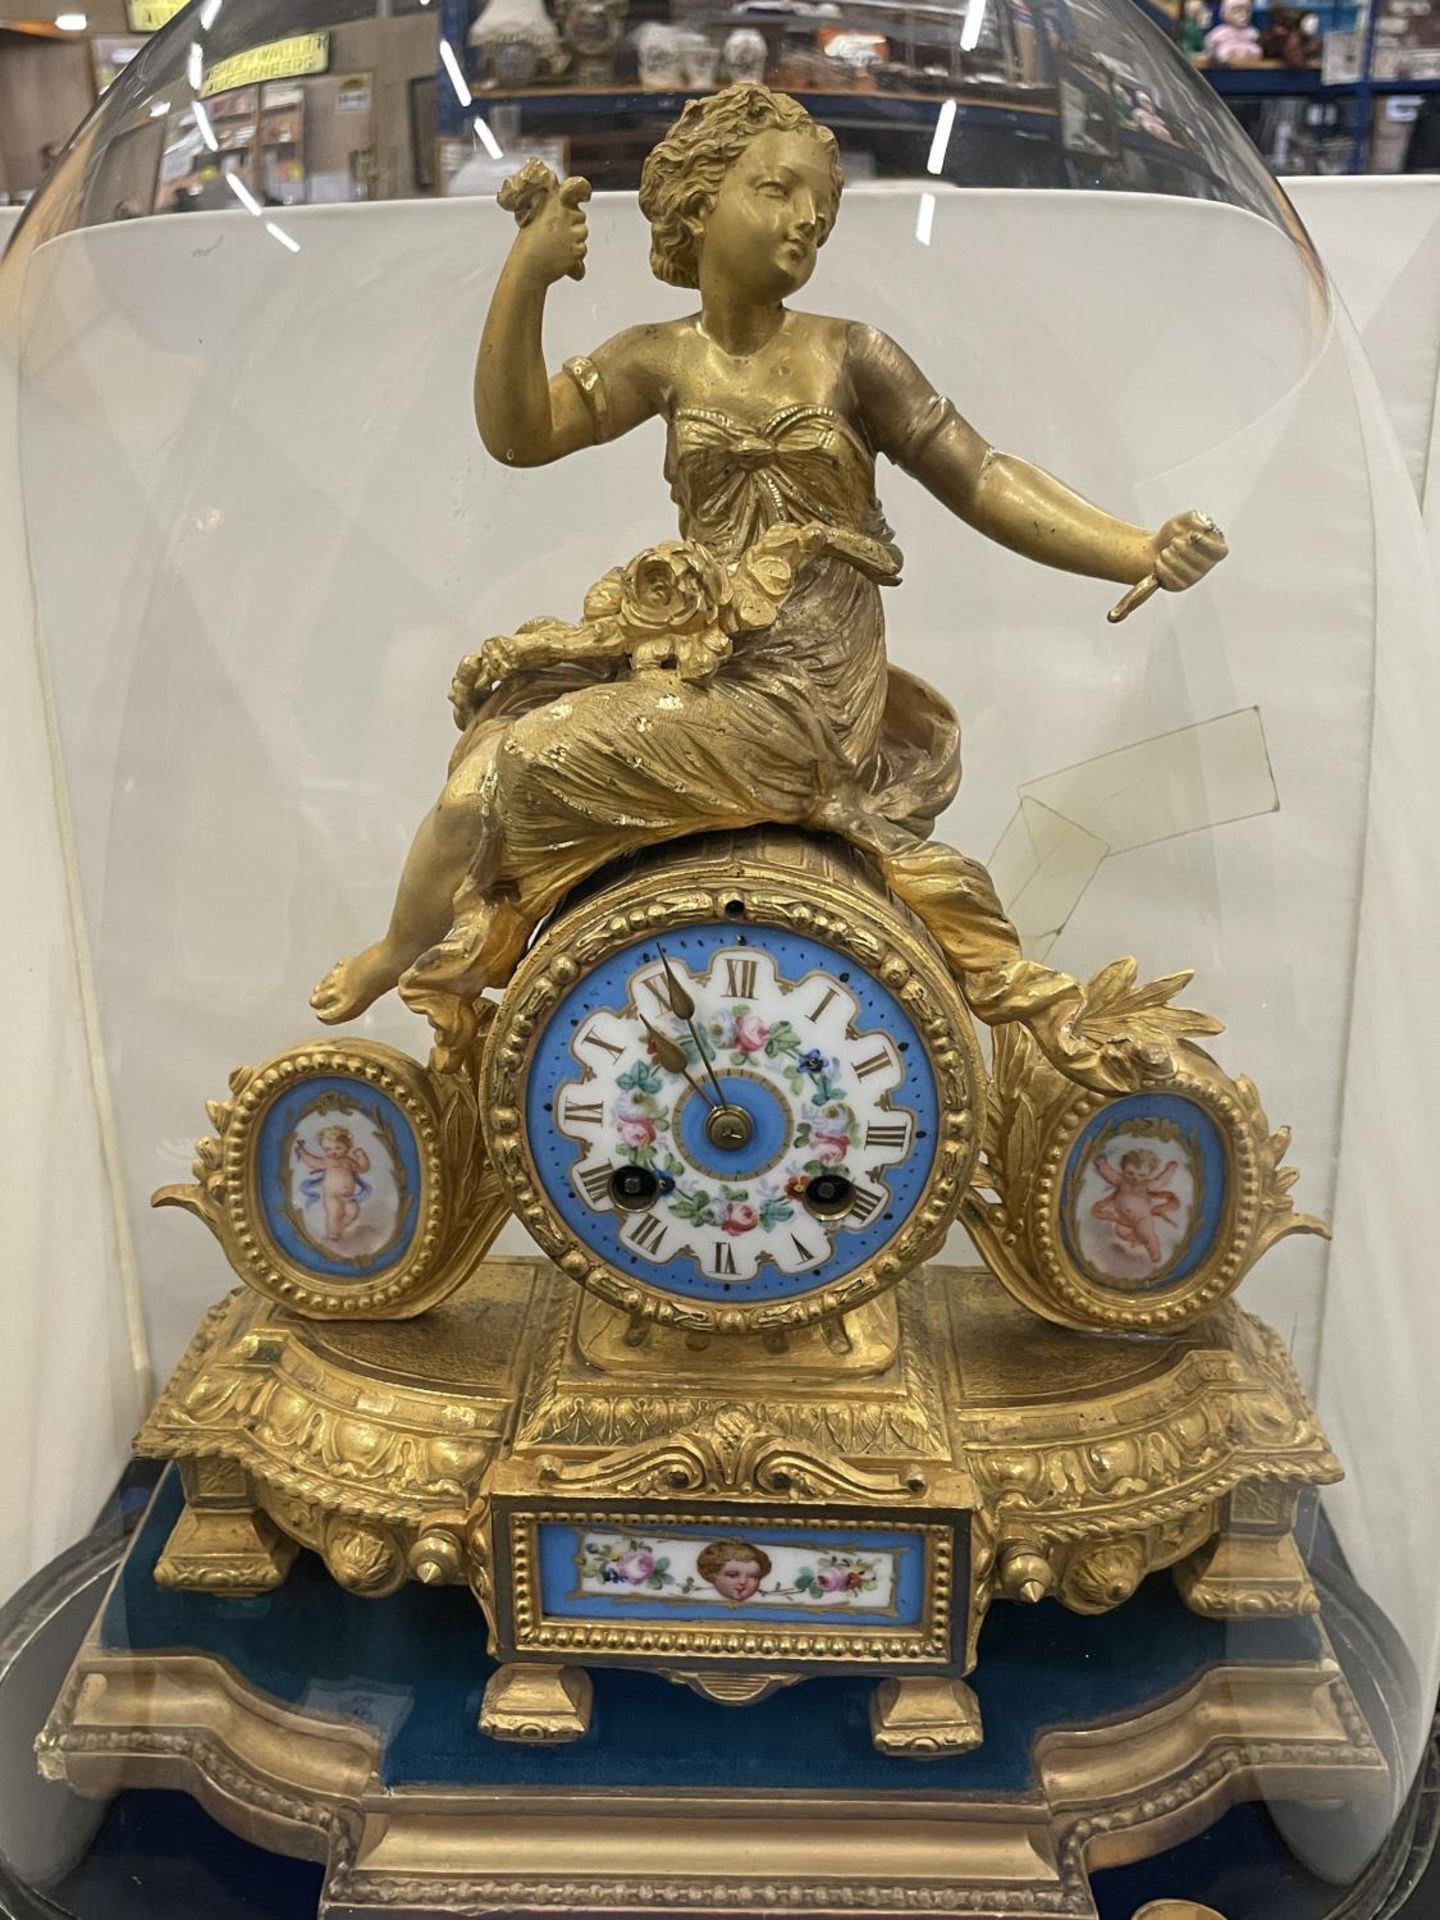 A VINTAGE FRENCH ORMOLU CLOCK WITH DECORATIVE ENAMEL FACE AND PANELS IN A GLASS DOME (A/F) - Image 3 of 10